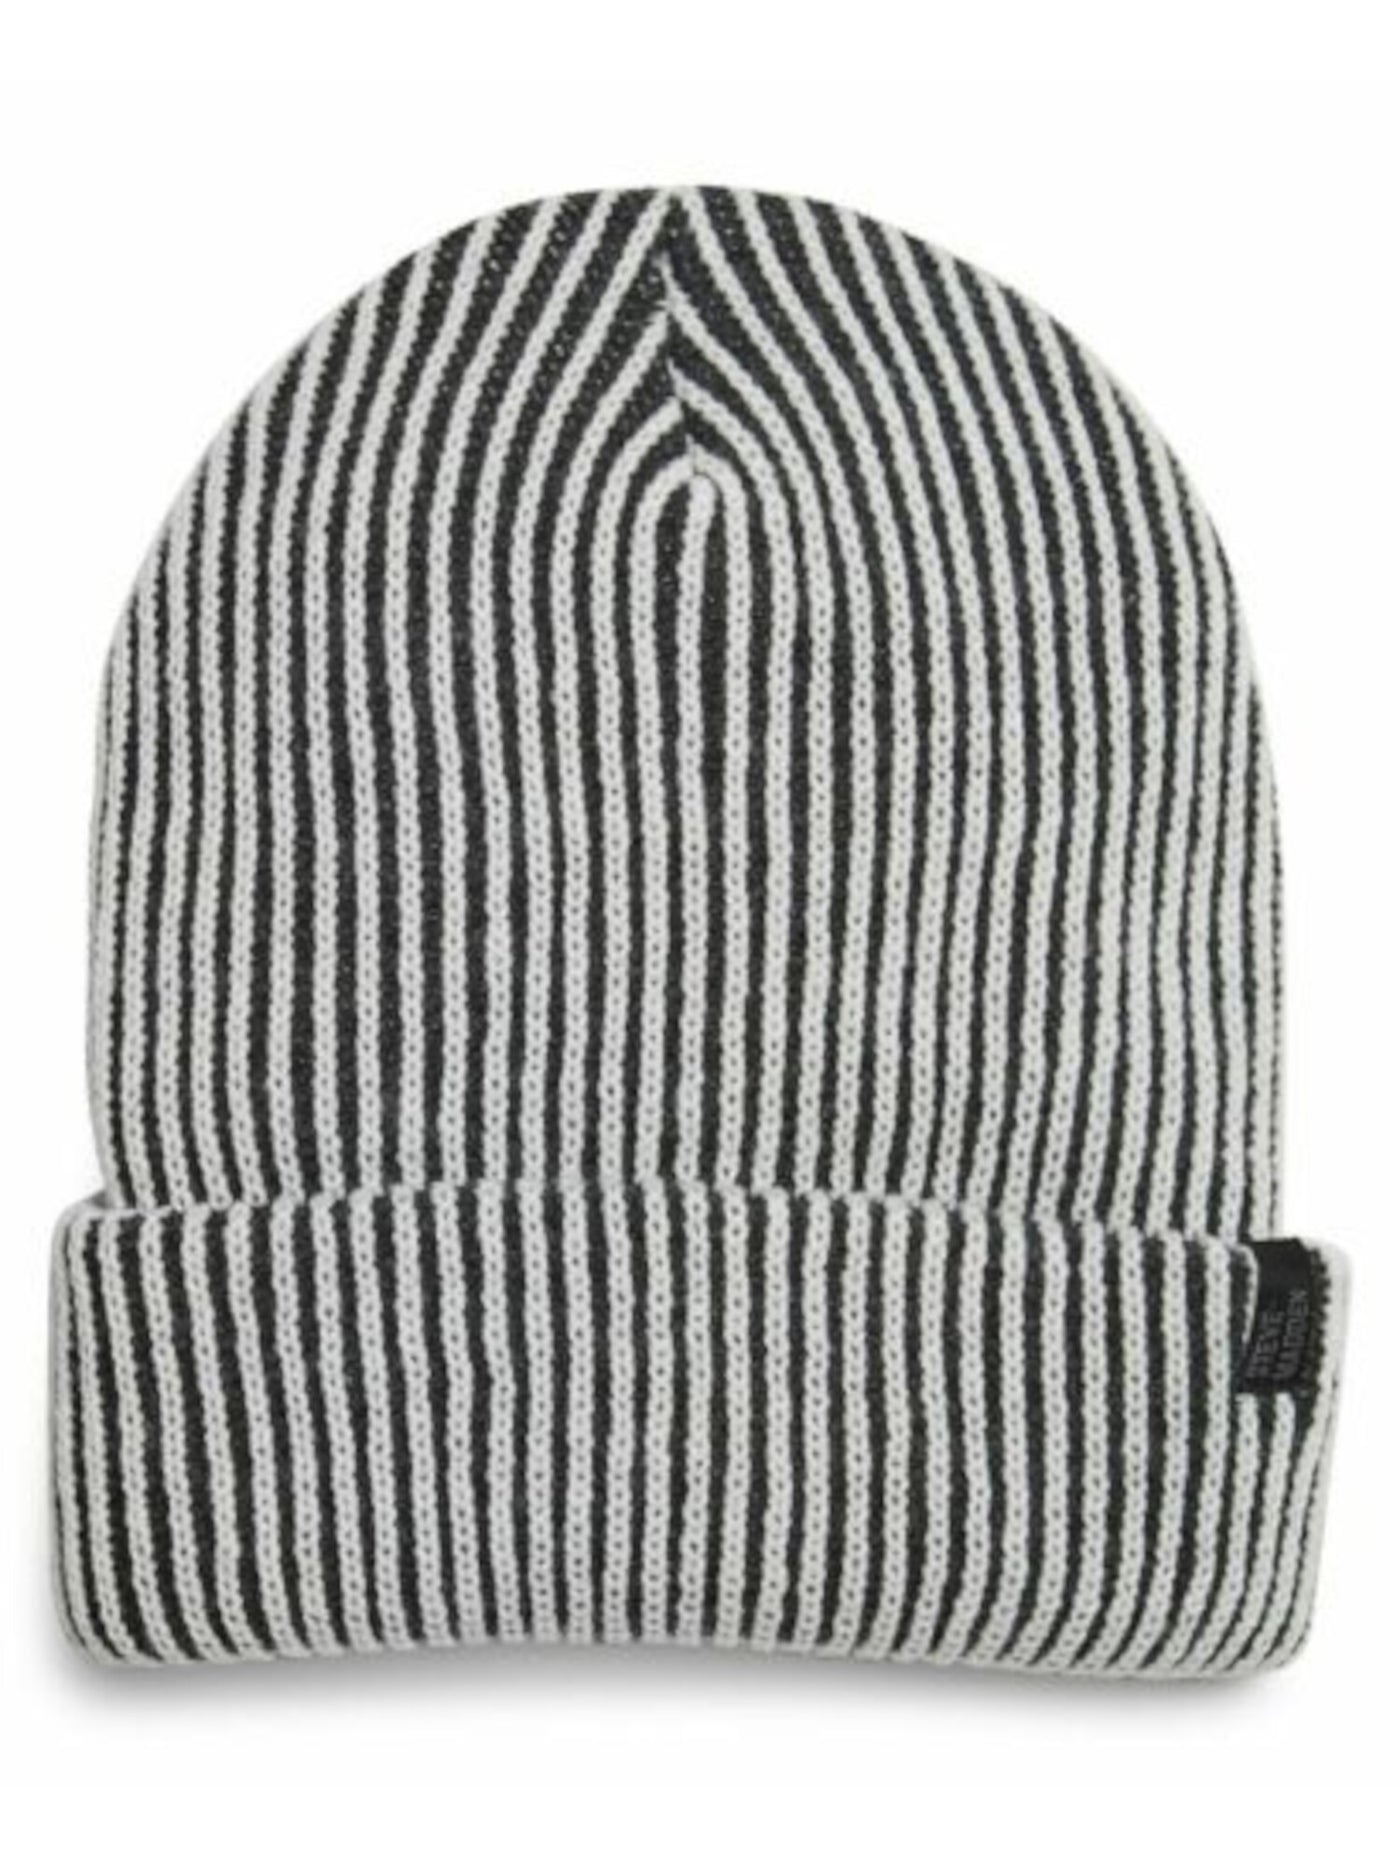 STEVE MADDEN Mens White and Black Striped Knit Fitted Winter Beanie Hat Cap